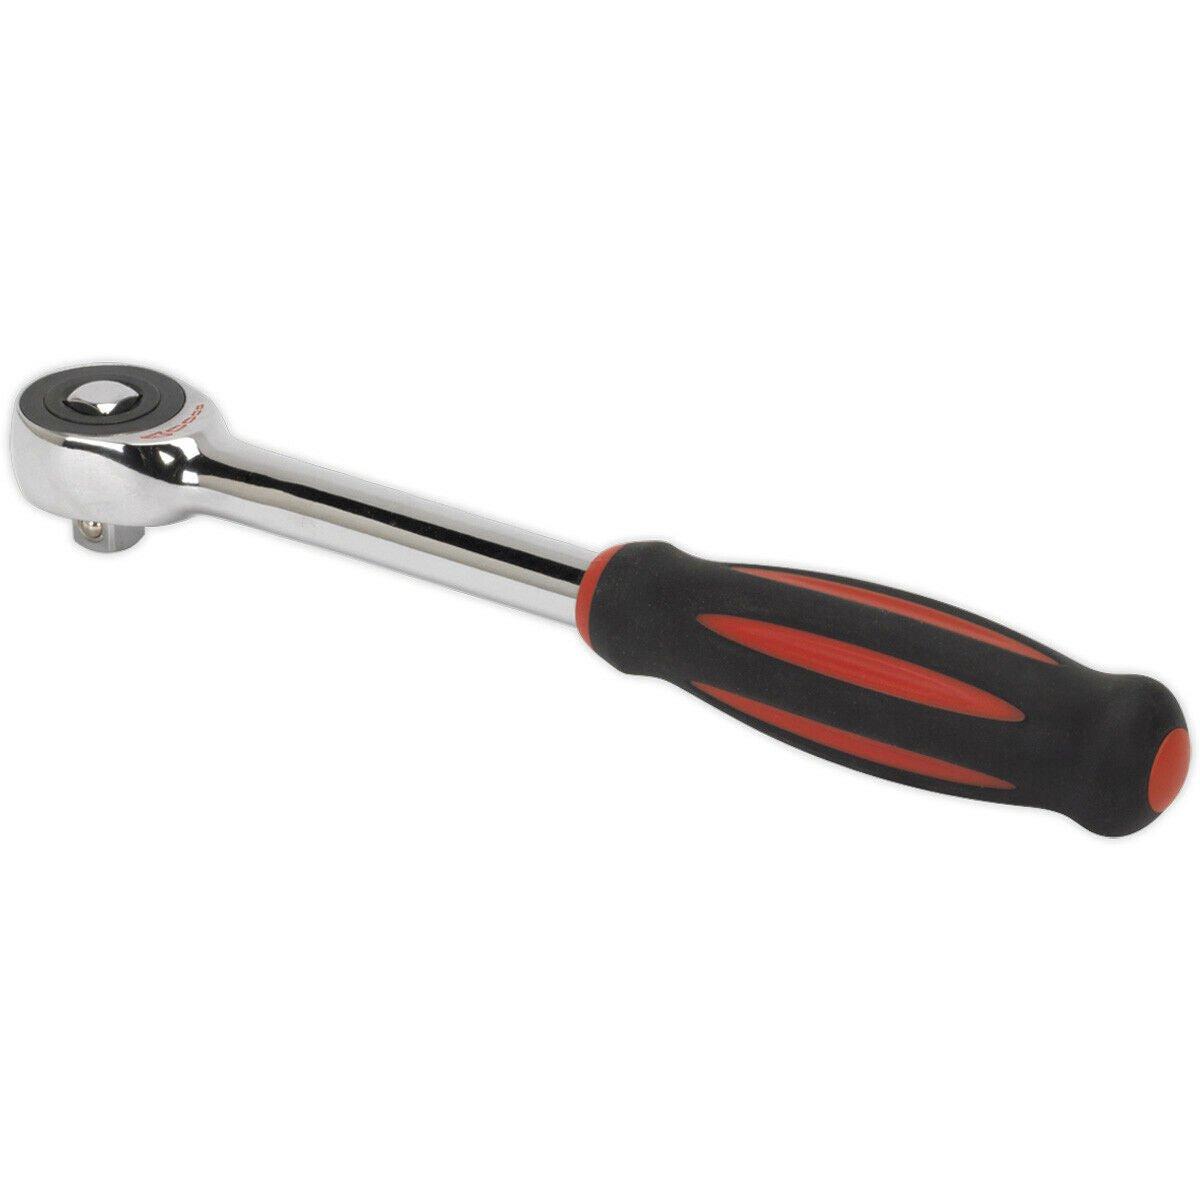 Ratchet Speed Wrench - 1/2 Inch Sq Drive - Dual Action Push-Through Reverse